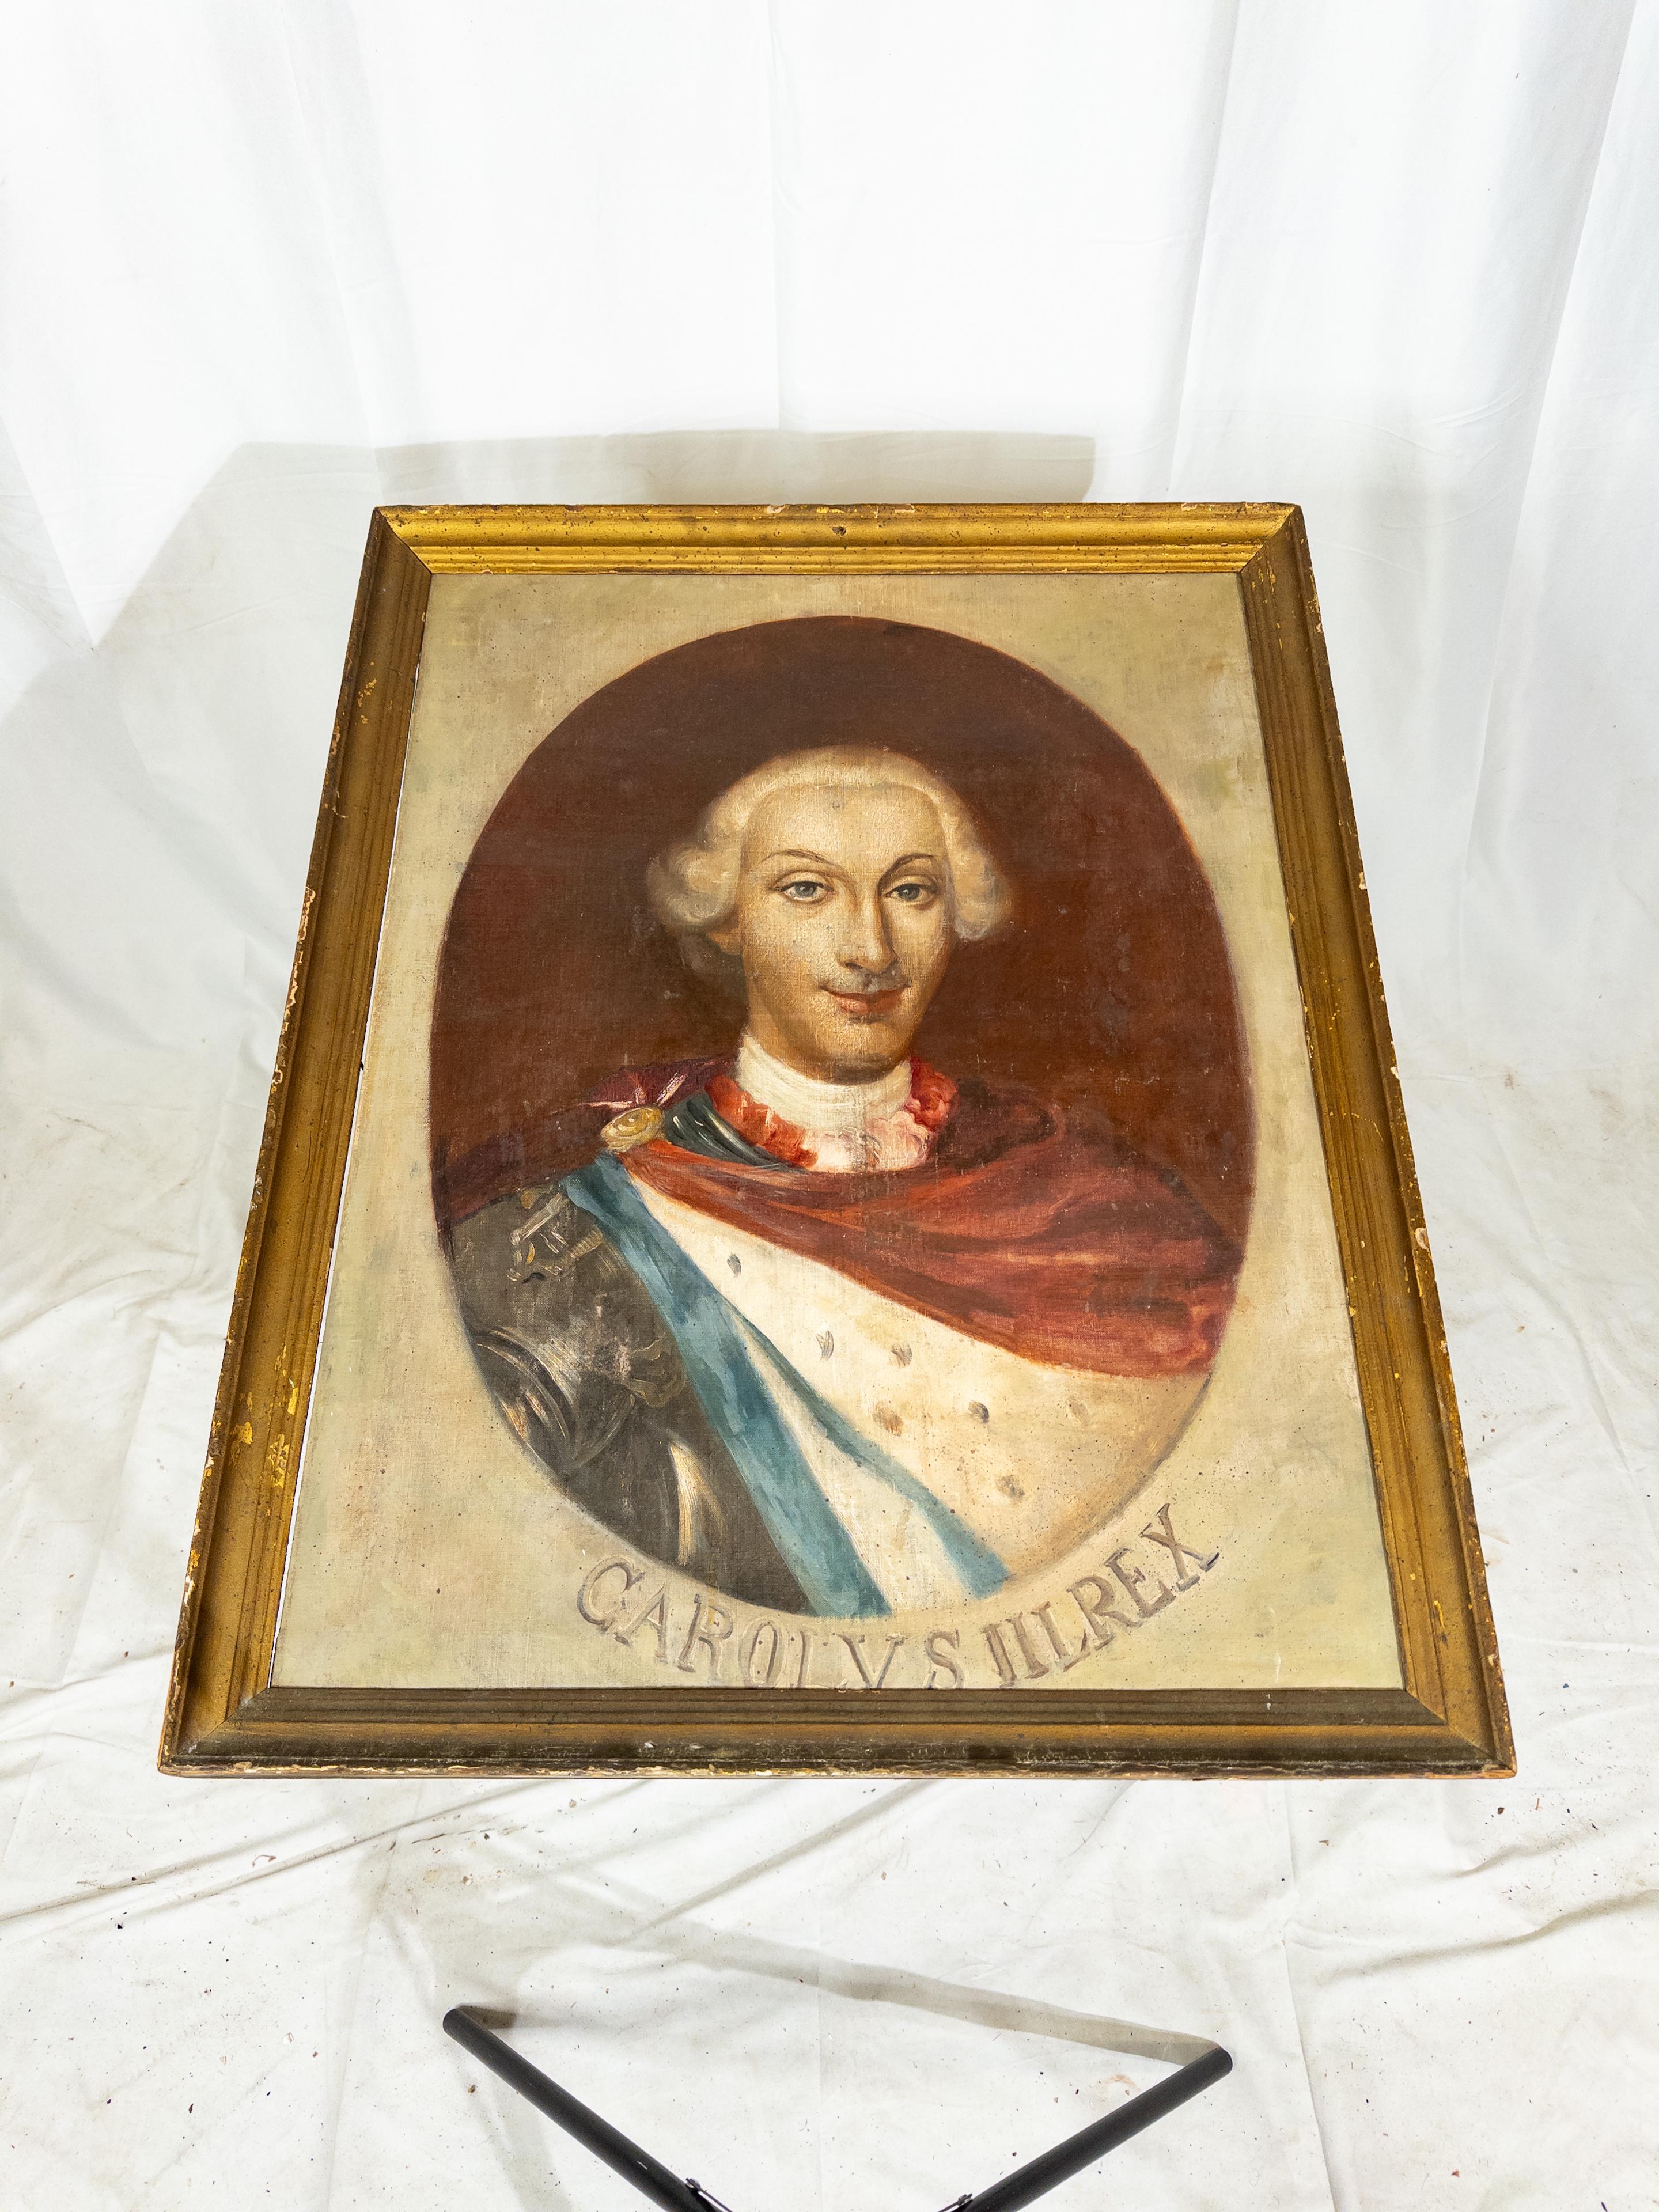 The Antique Carolus Rex III Portrait Painting, encased in a resplendent gilt frame, is a captivating testament to regal history and artistry. The painting portrays a figure of unmistakable royalty, exuding an aura of authority and grace. The